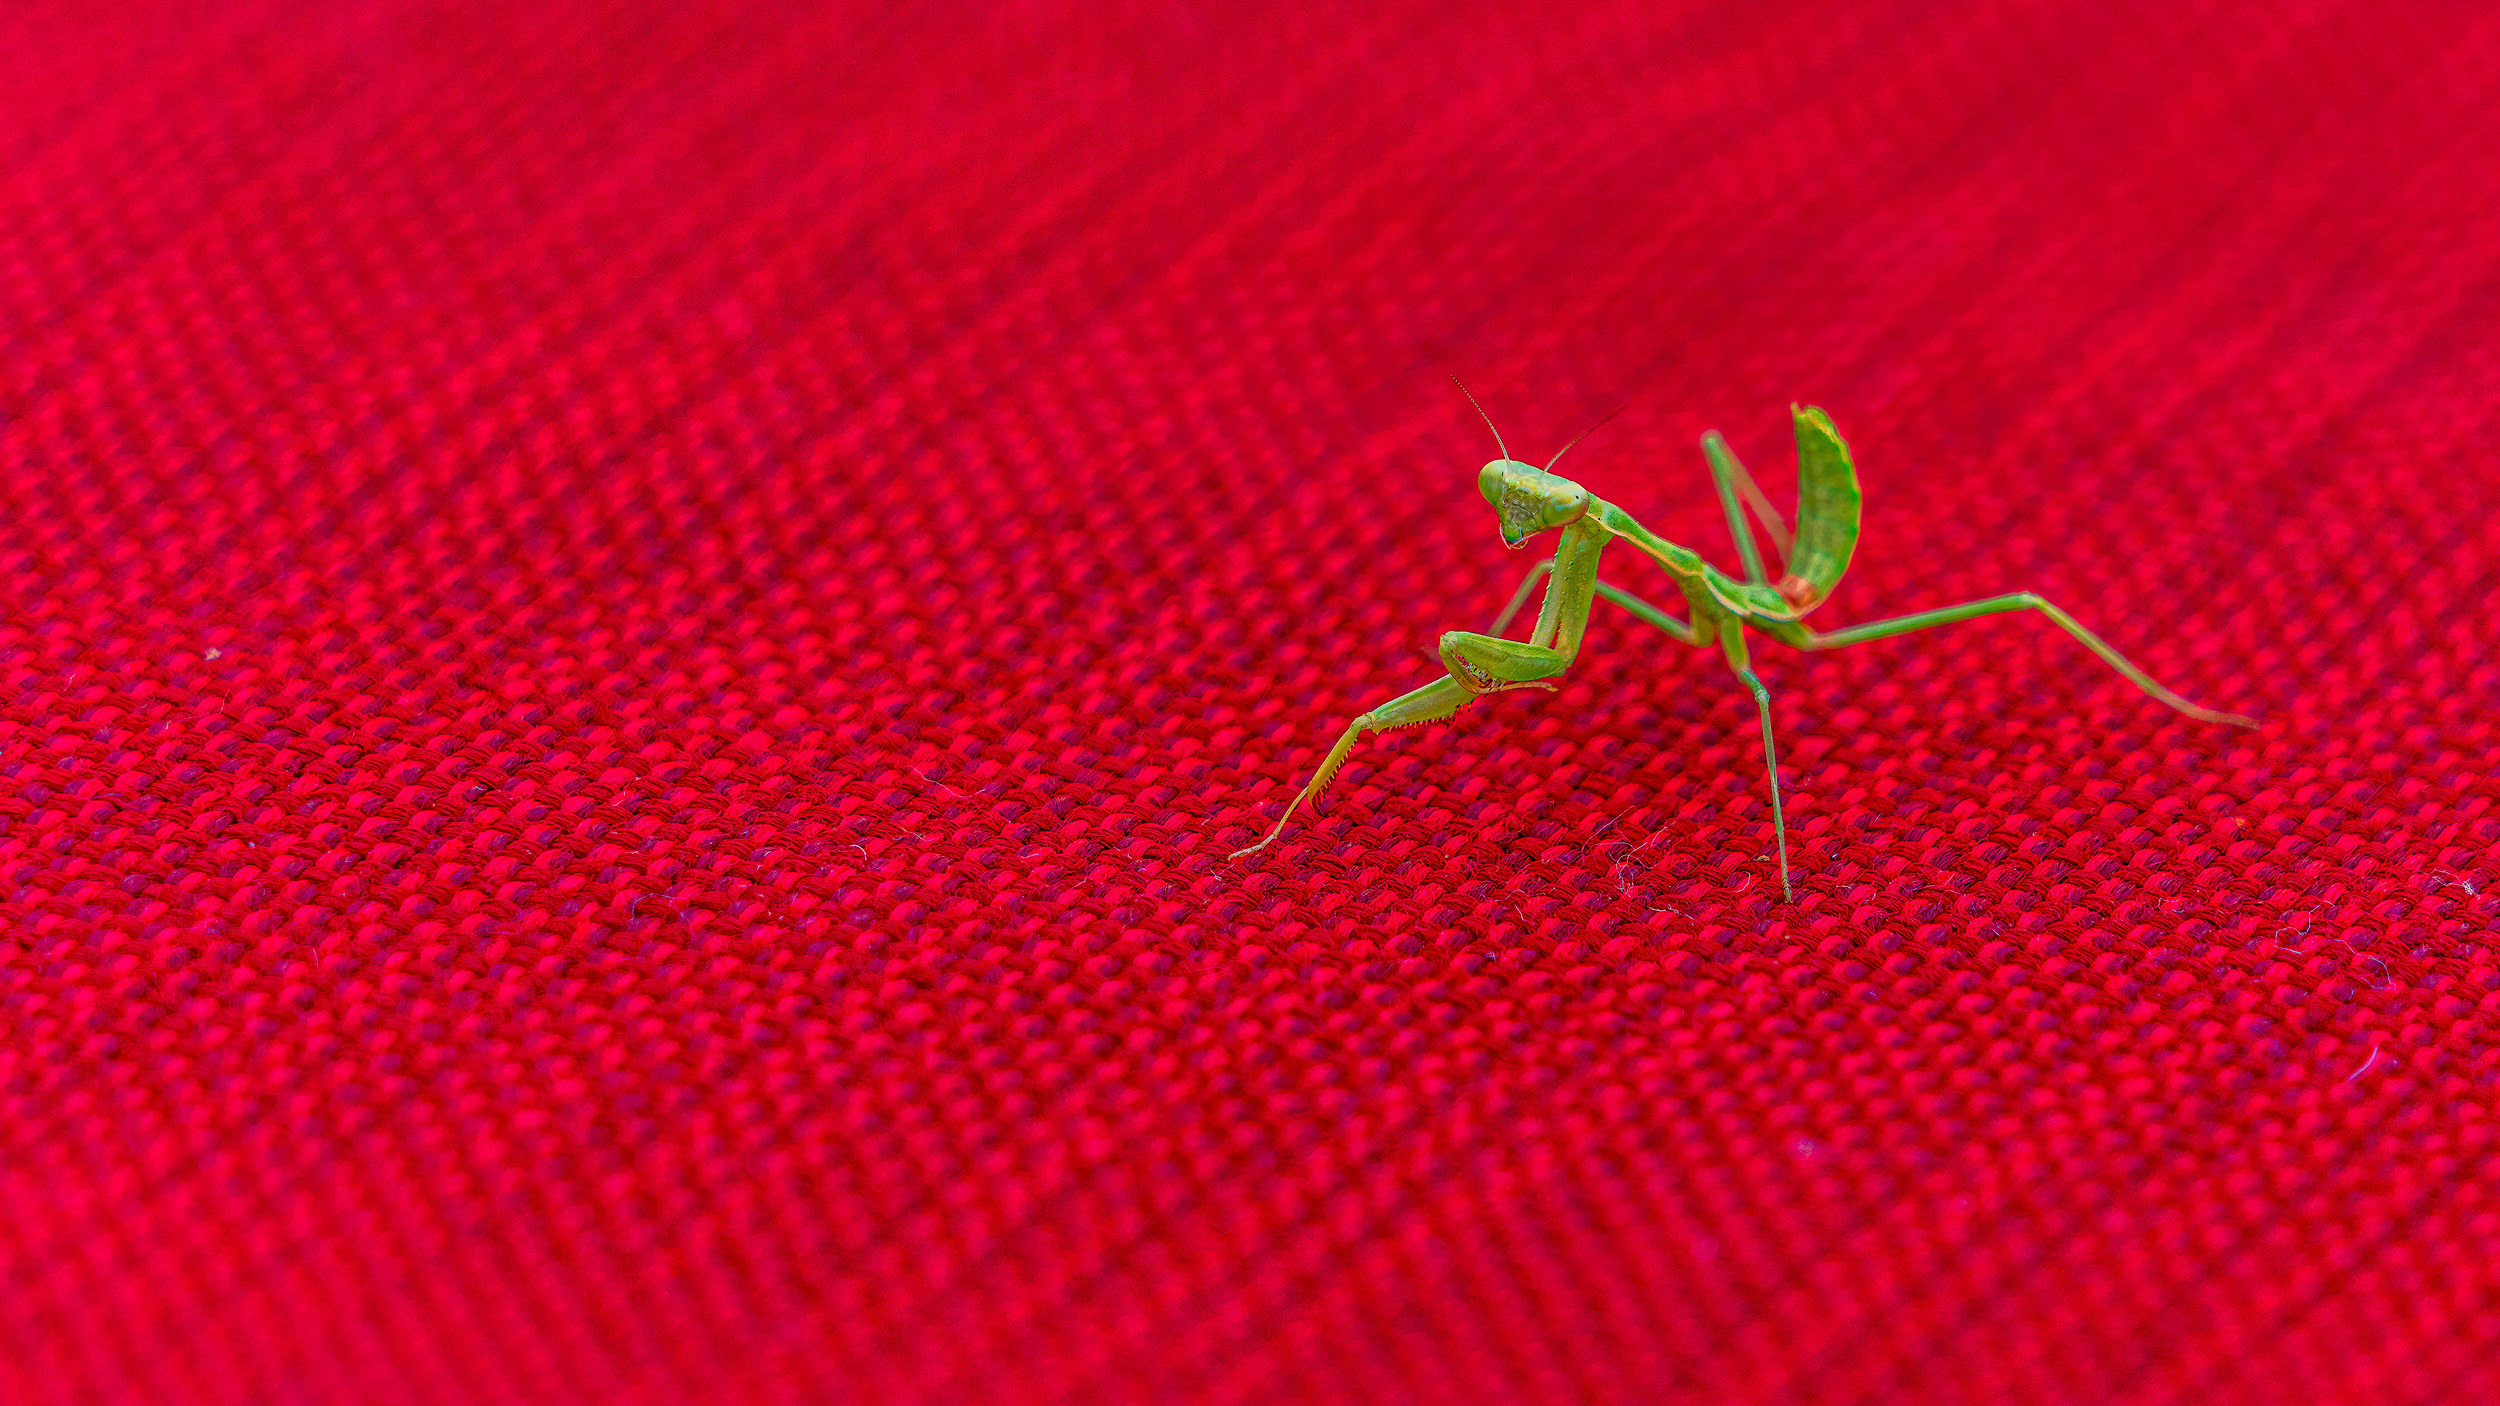 Baby Mantis on red